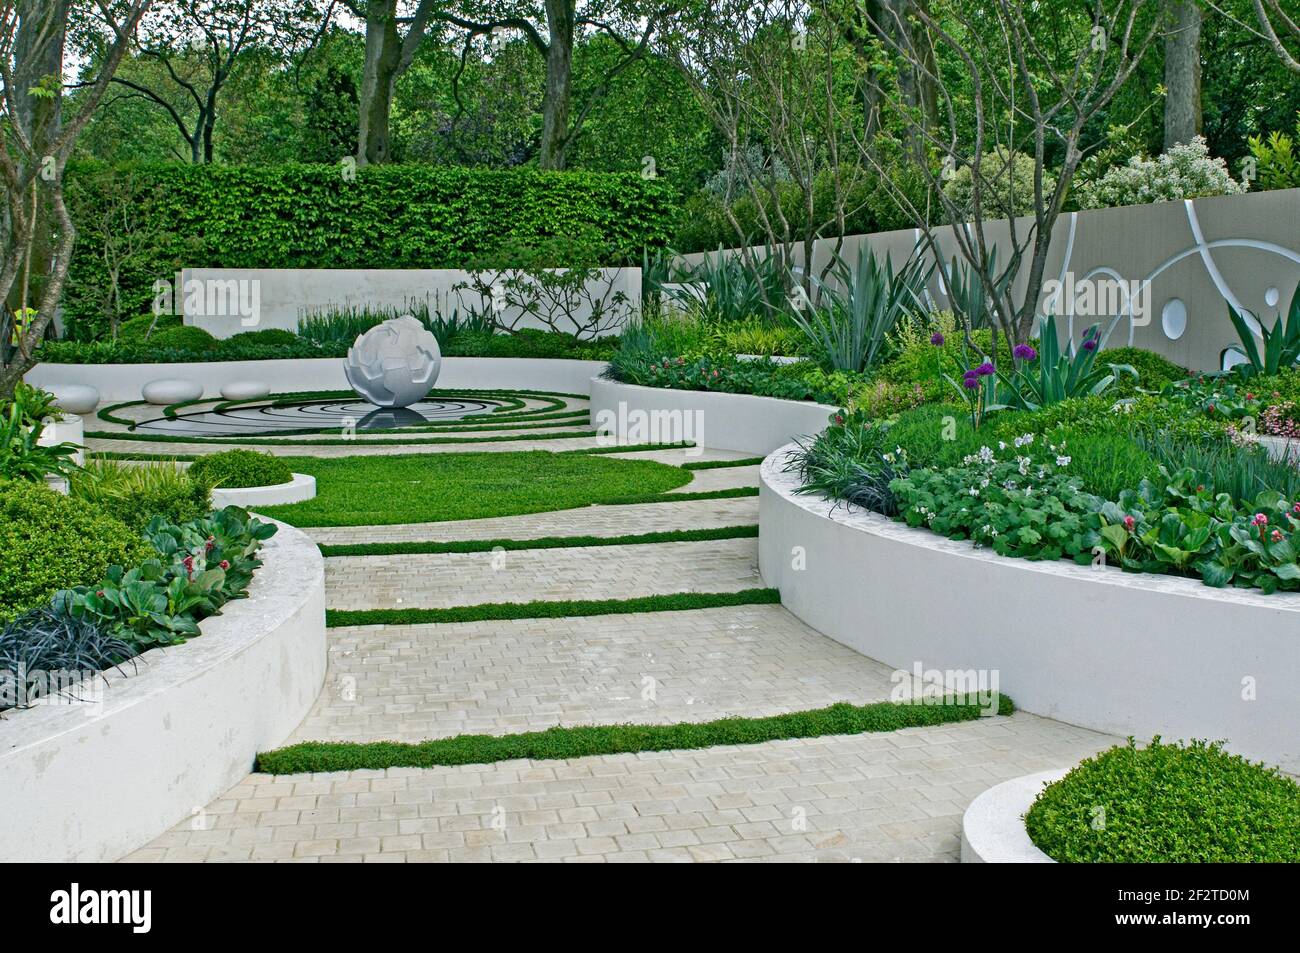 Modern water garden with sculpture feature and raised beds Stock Photo